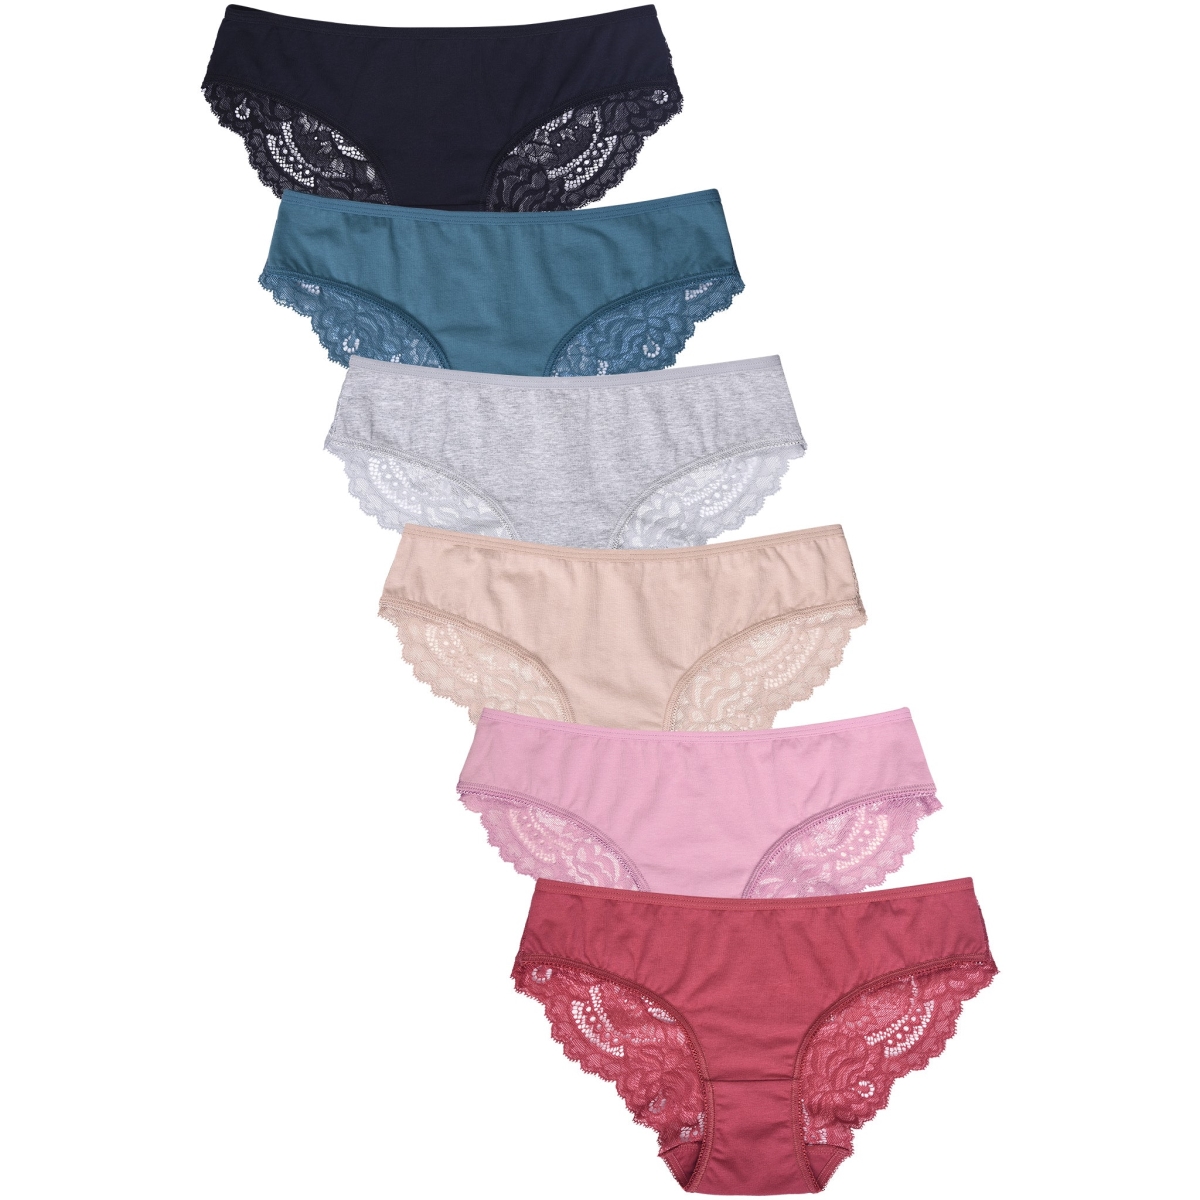 Picture of 247 Frenzy 247-LP1402CK2-MD Sofra Womens Essentials Cotton Stretch Bikini Panty Underwear - Assorted Color - Medium - Pack of 6